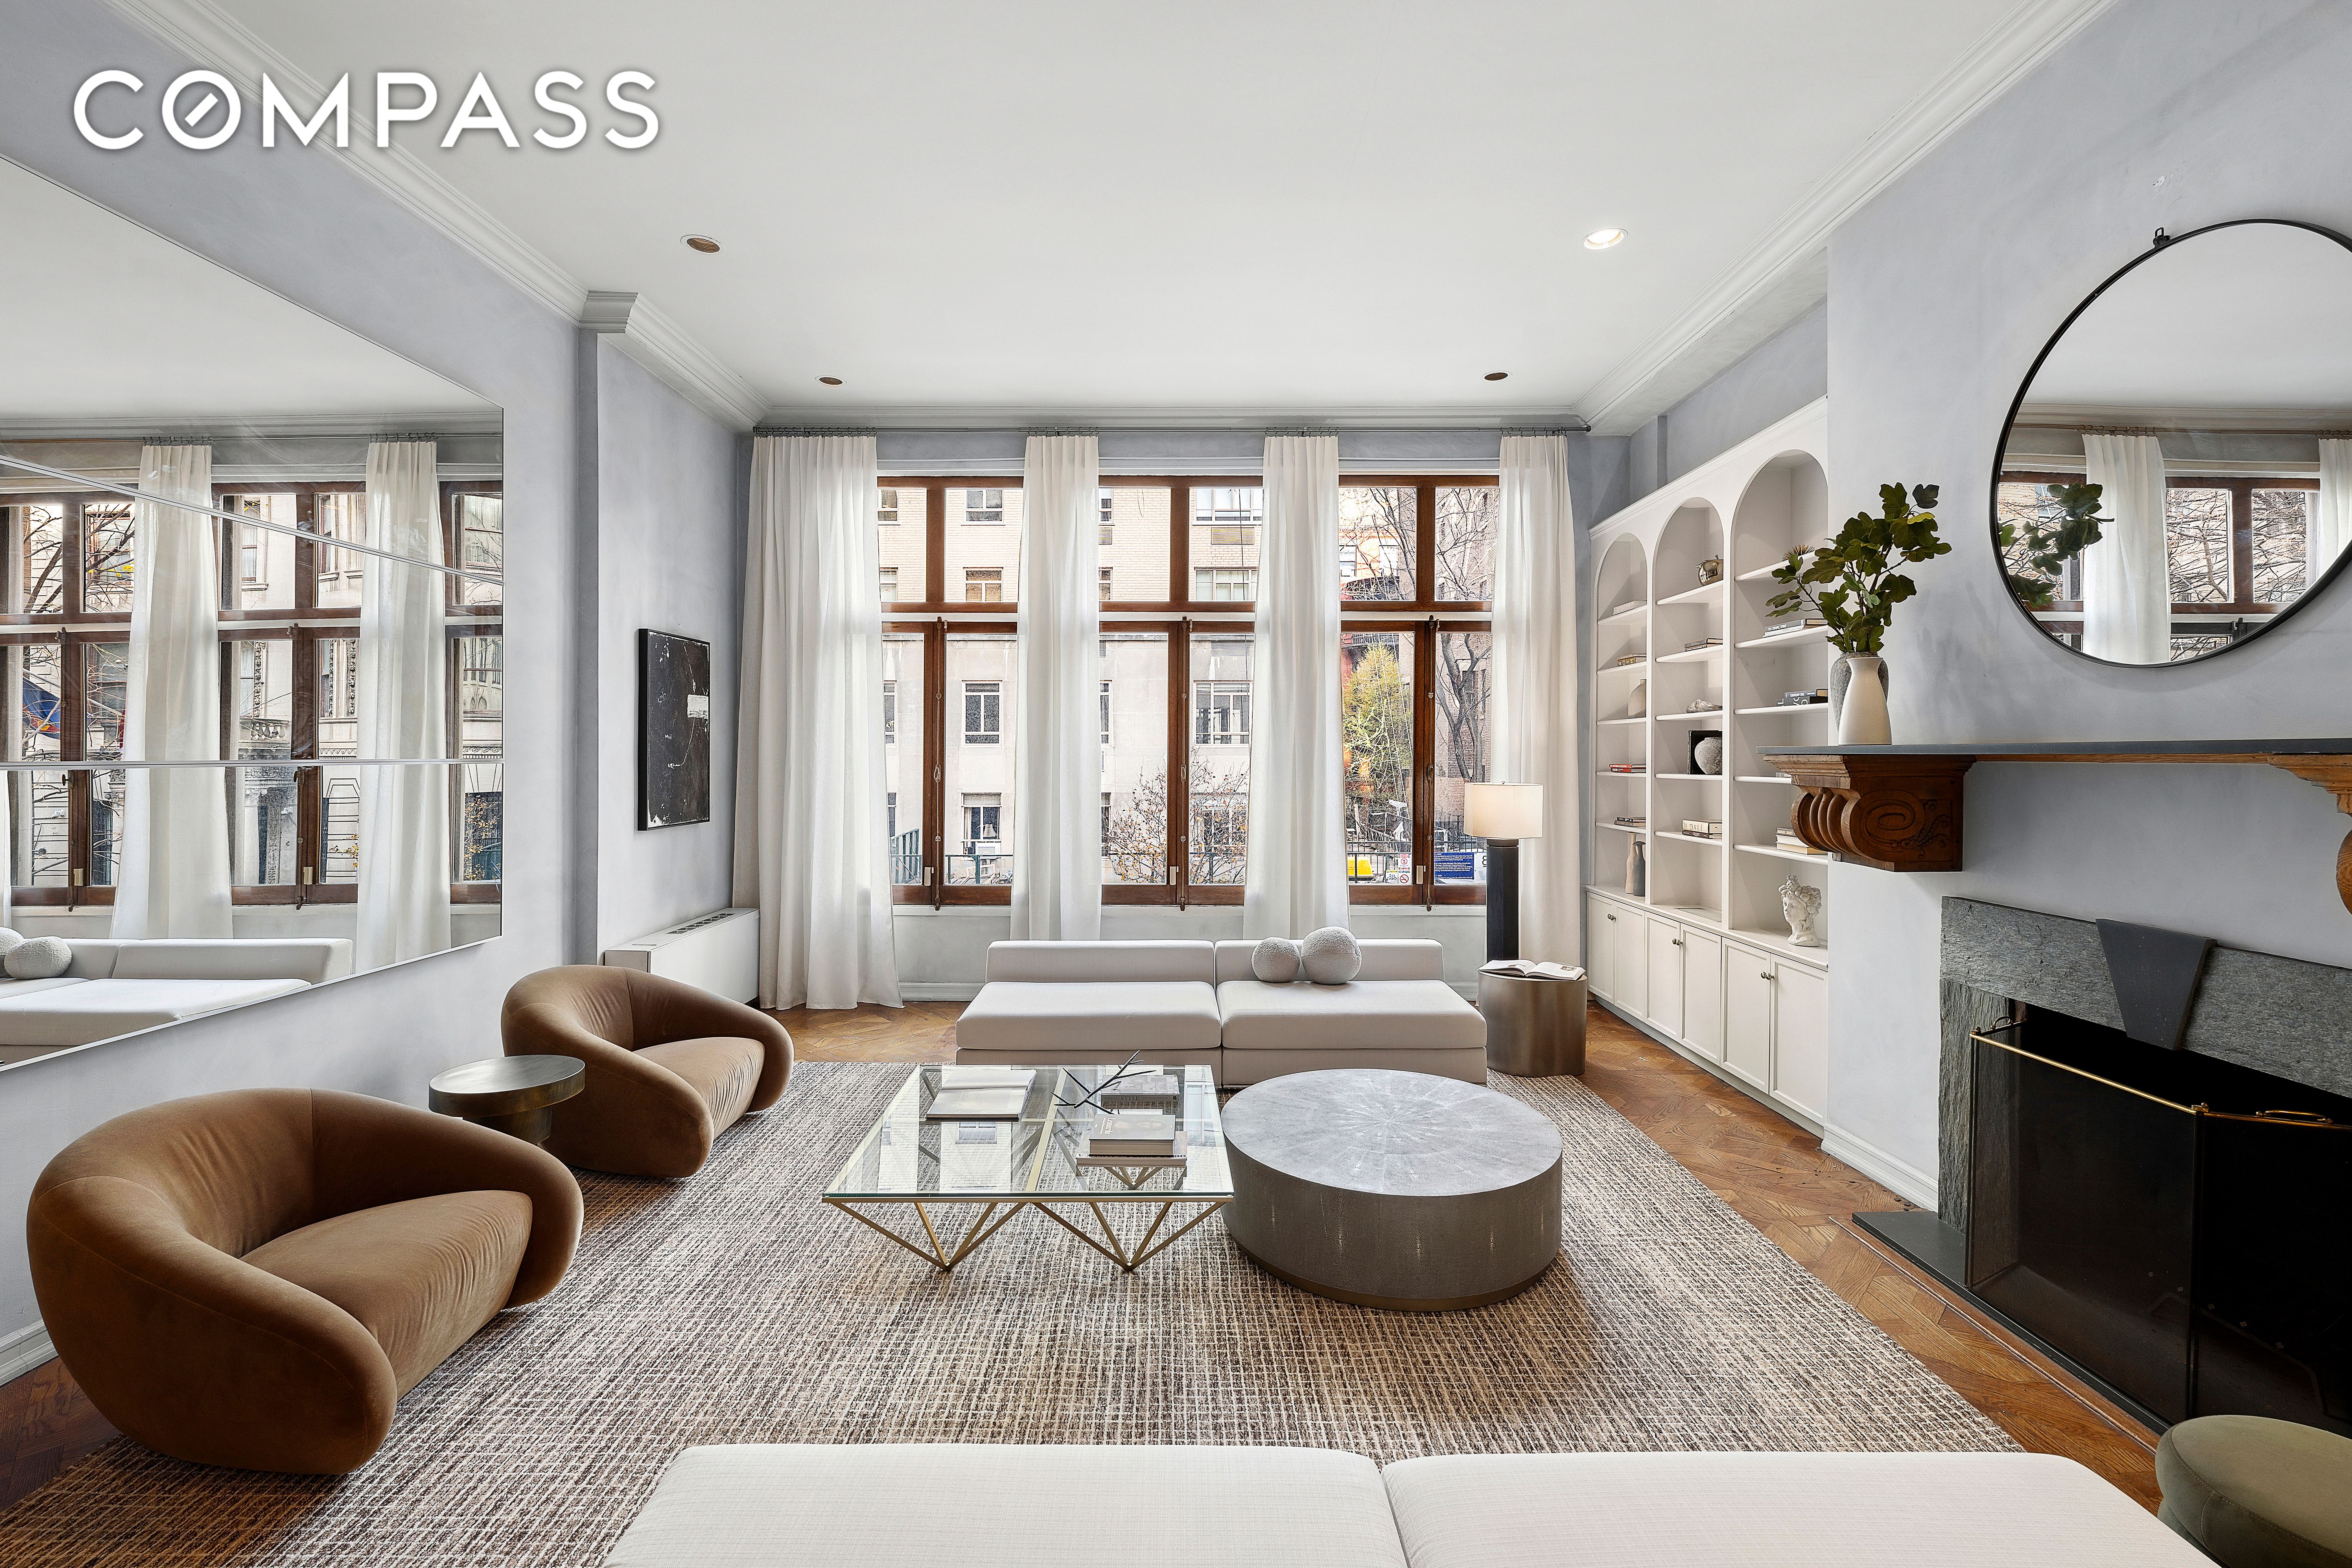 6 East 68th Street 2, Lenox Hill, Upper East Side, NYC - 2 Bedrooms  
2.5 Bathrooms  
5 Rooms - 